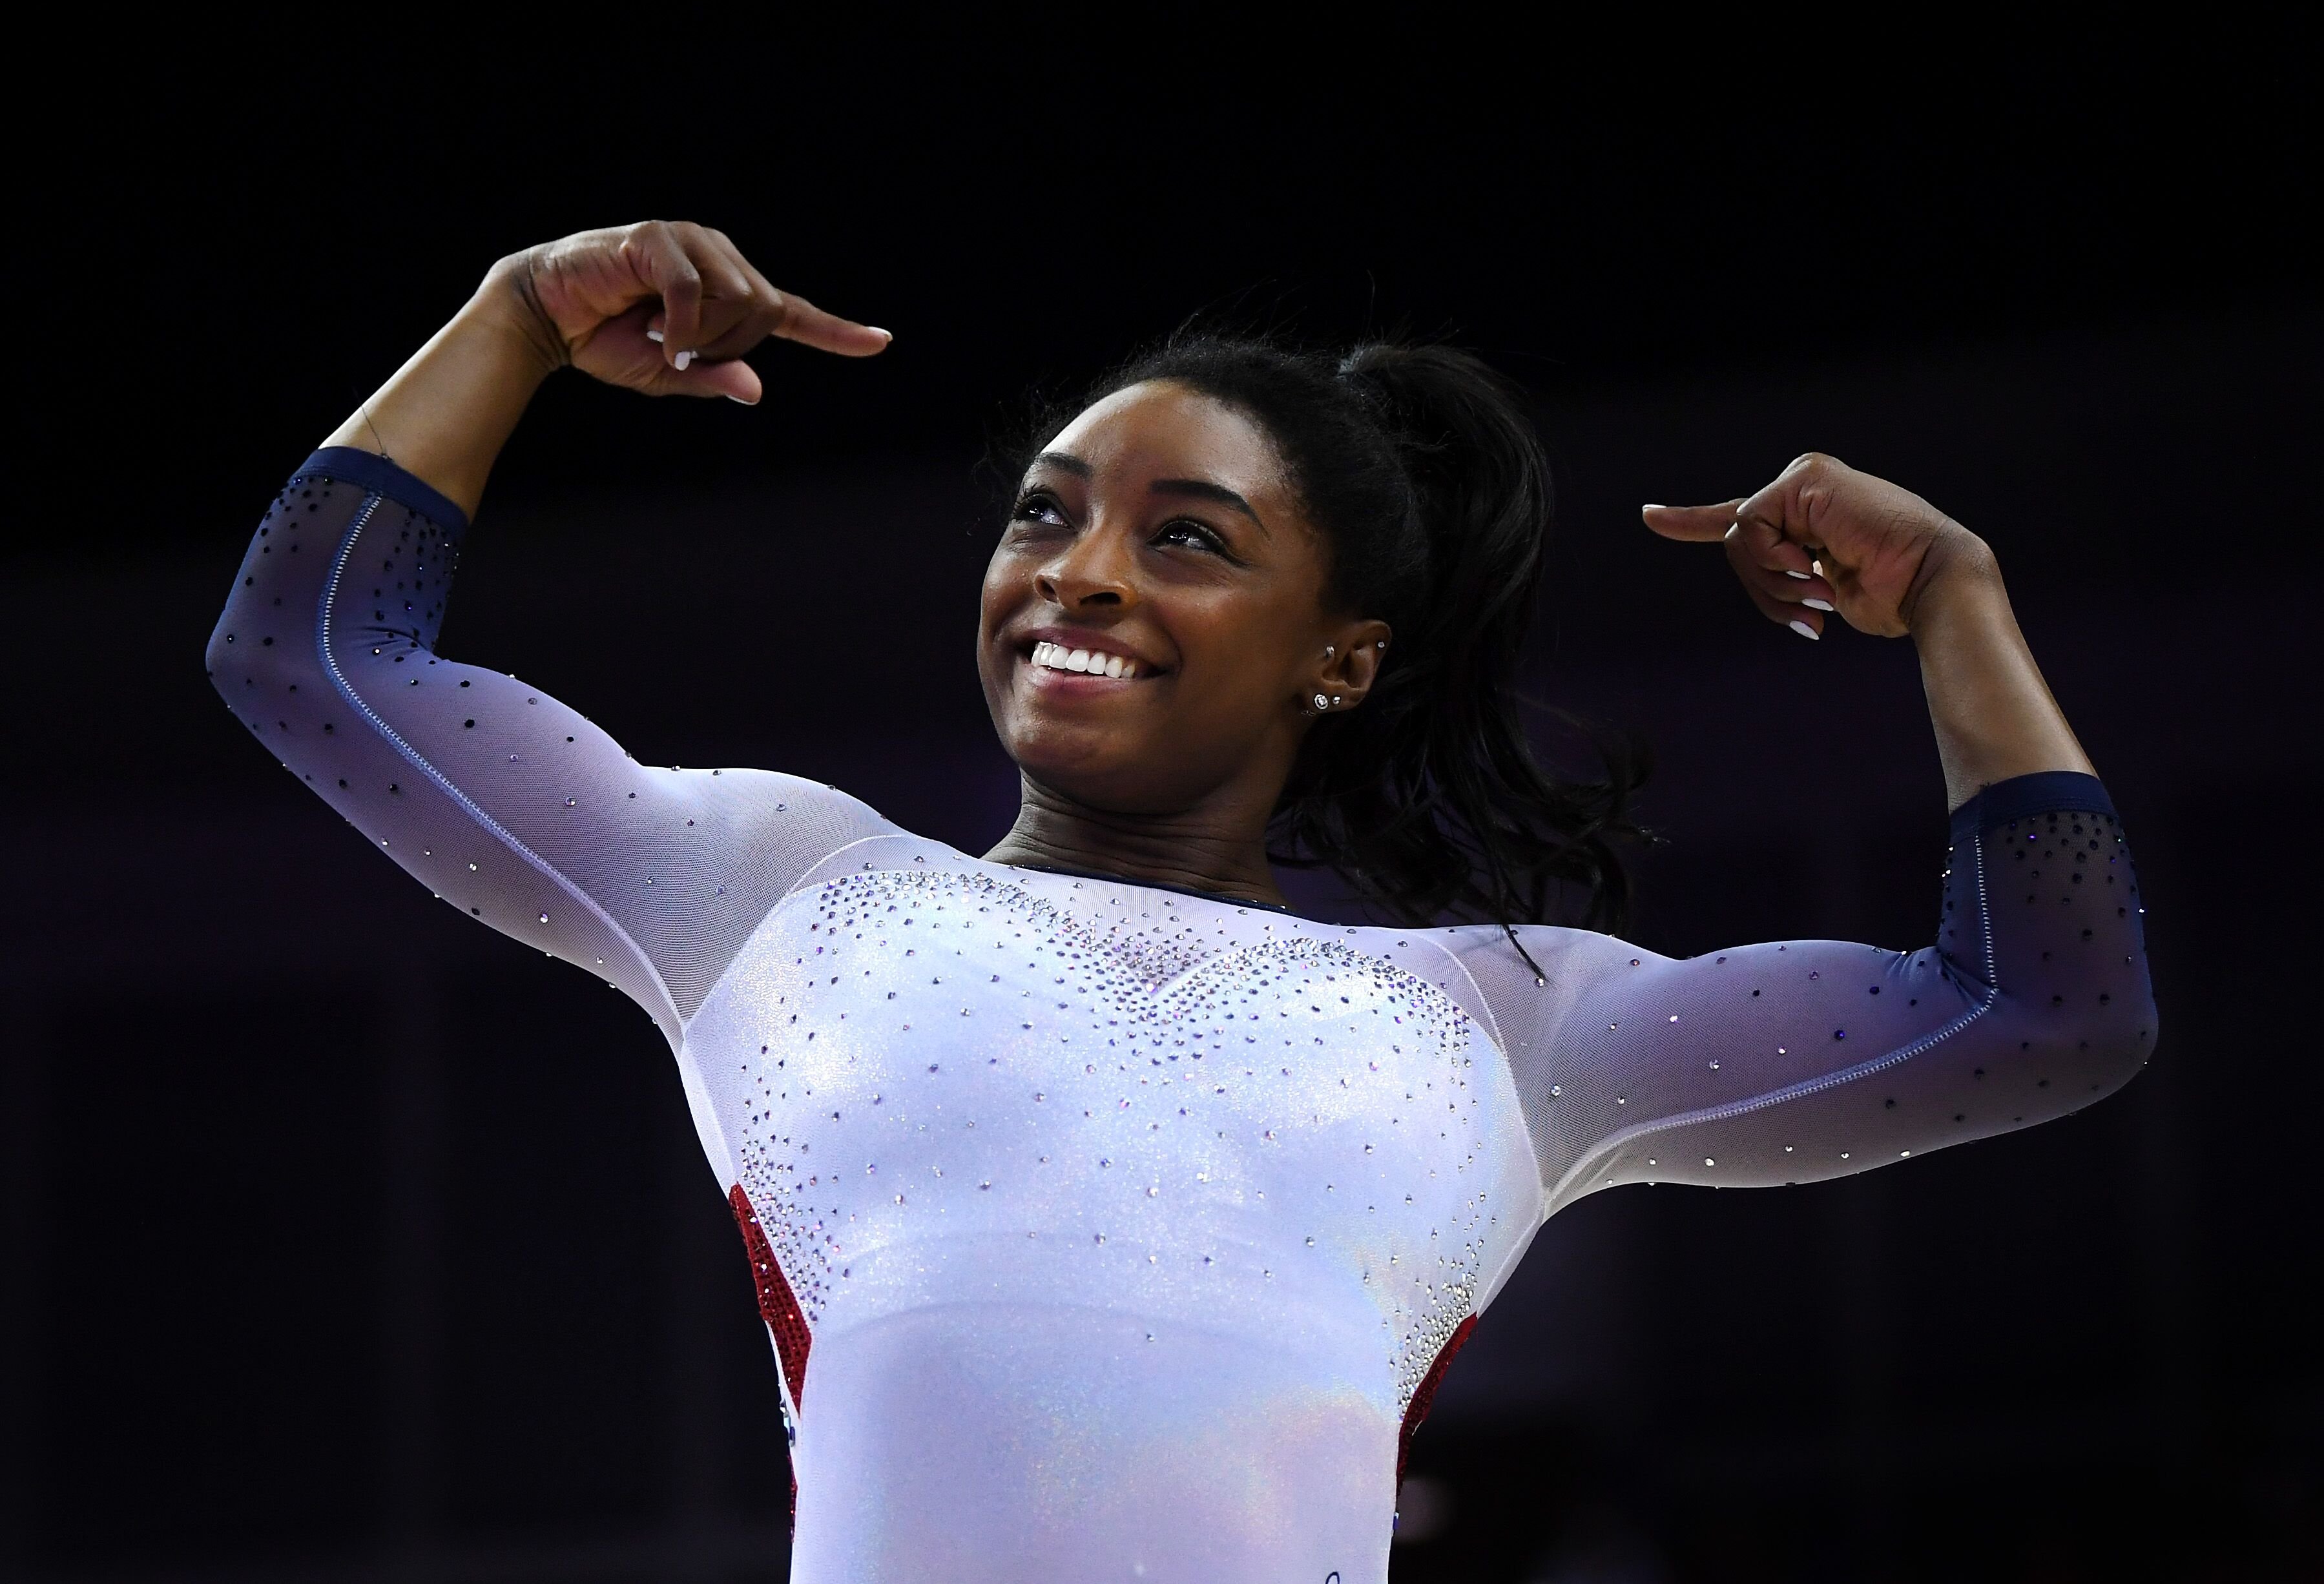 Simone Biles of the USA reacts after finishing her her performance on balance beam during the Superstars of Gymnastics at The O2 Arena on March 23, 2019 in London, England | Photo: Getty Images